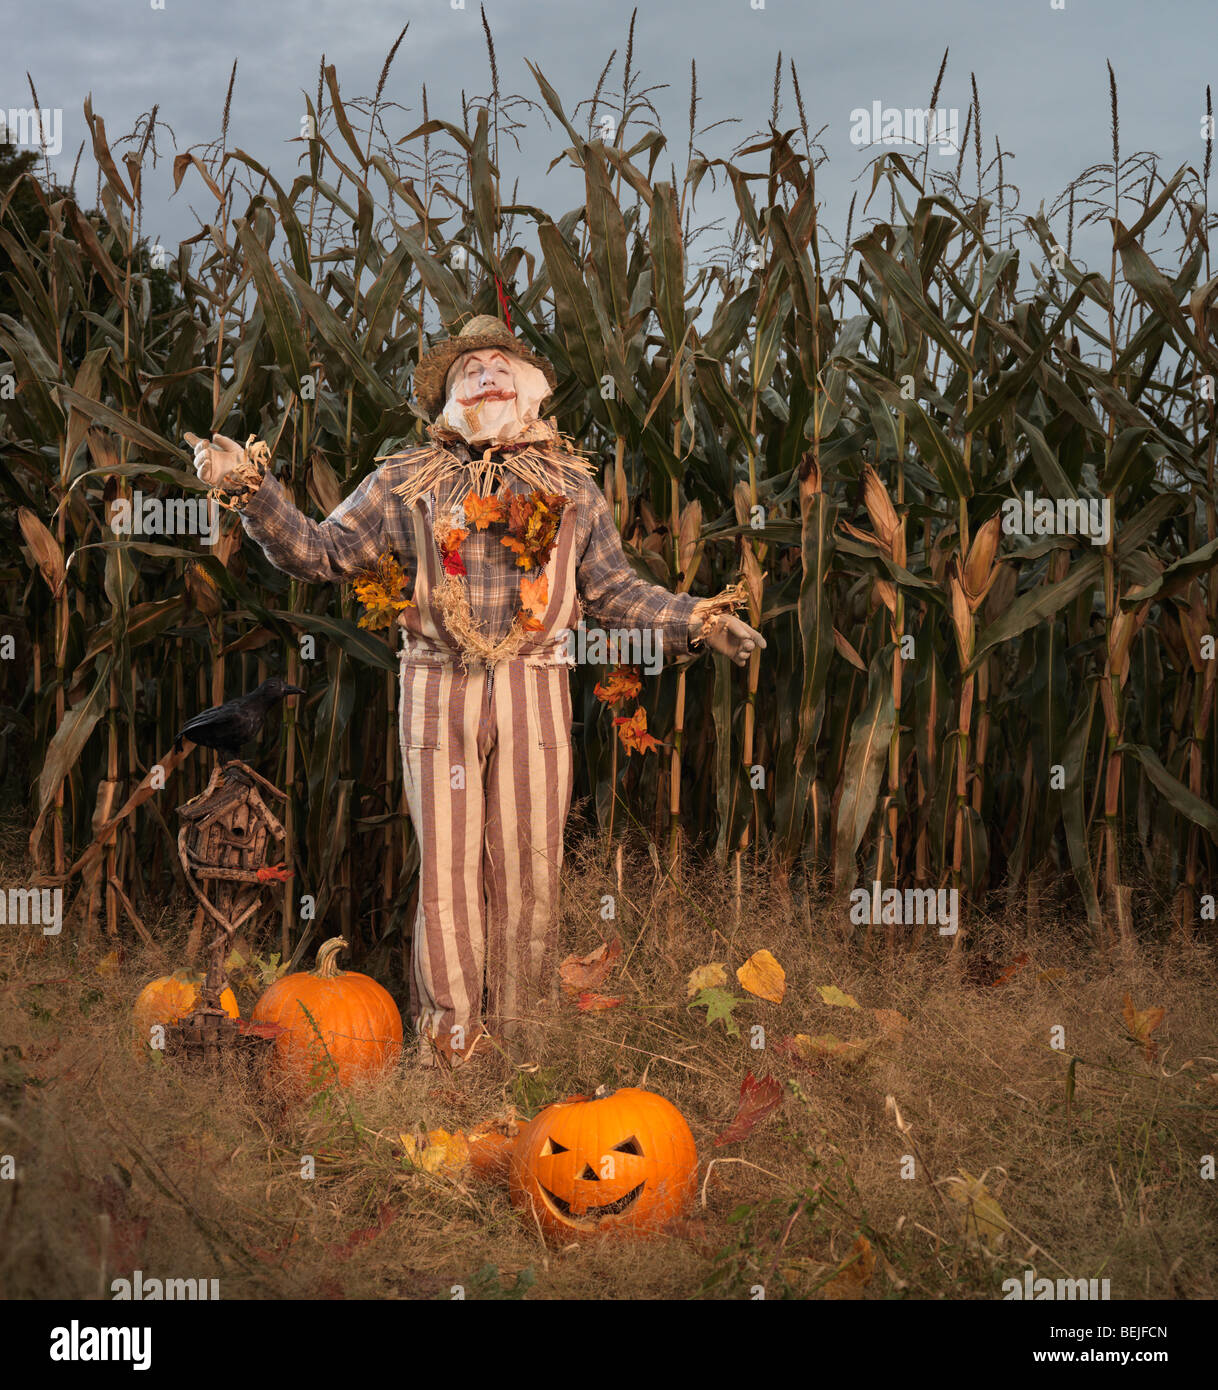 Scarecrow and pumpkins in a corn field. Halloween theme. Stock Photo